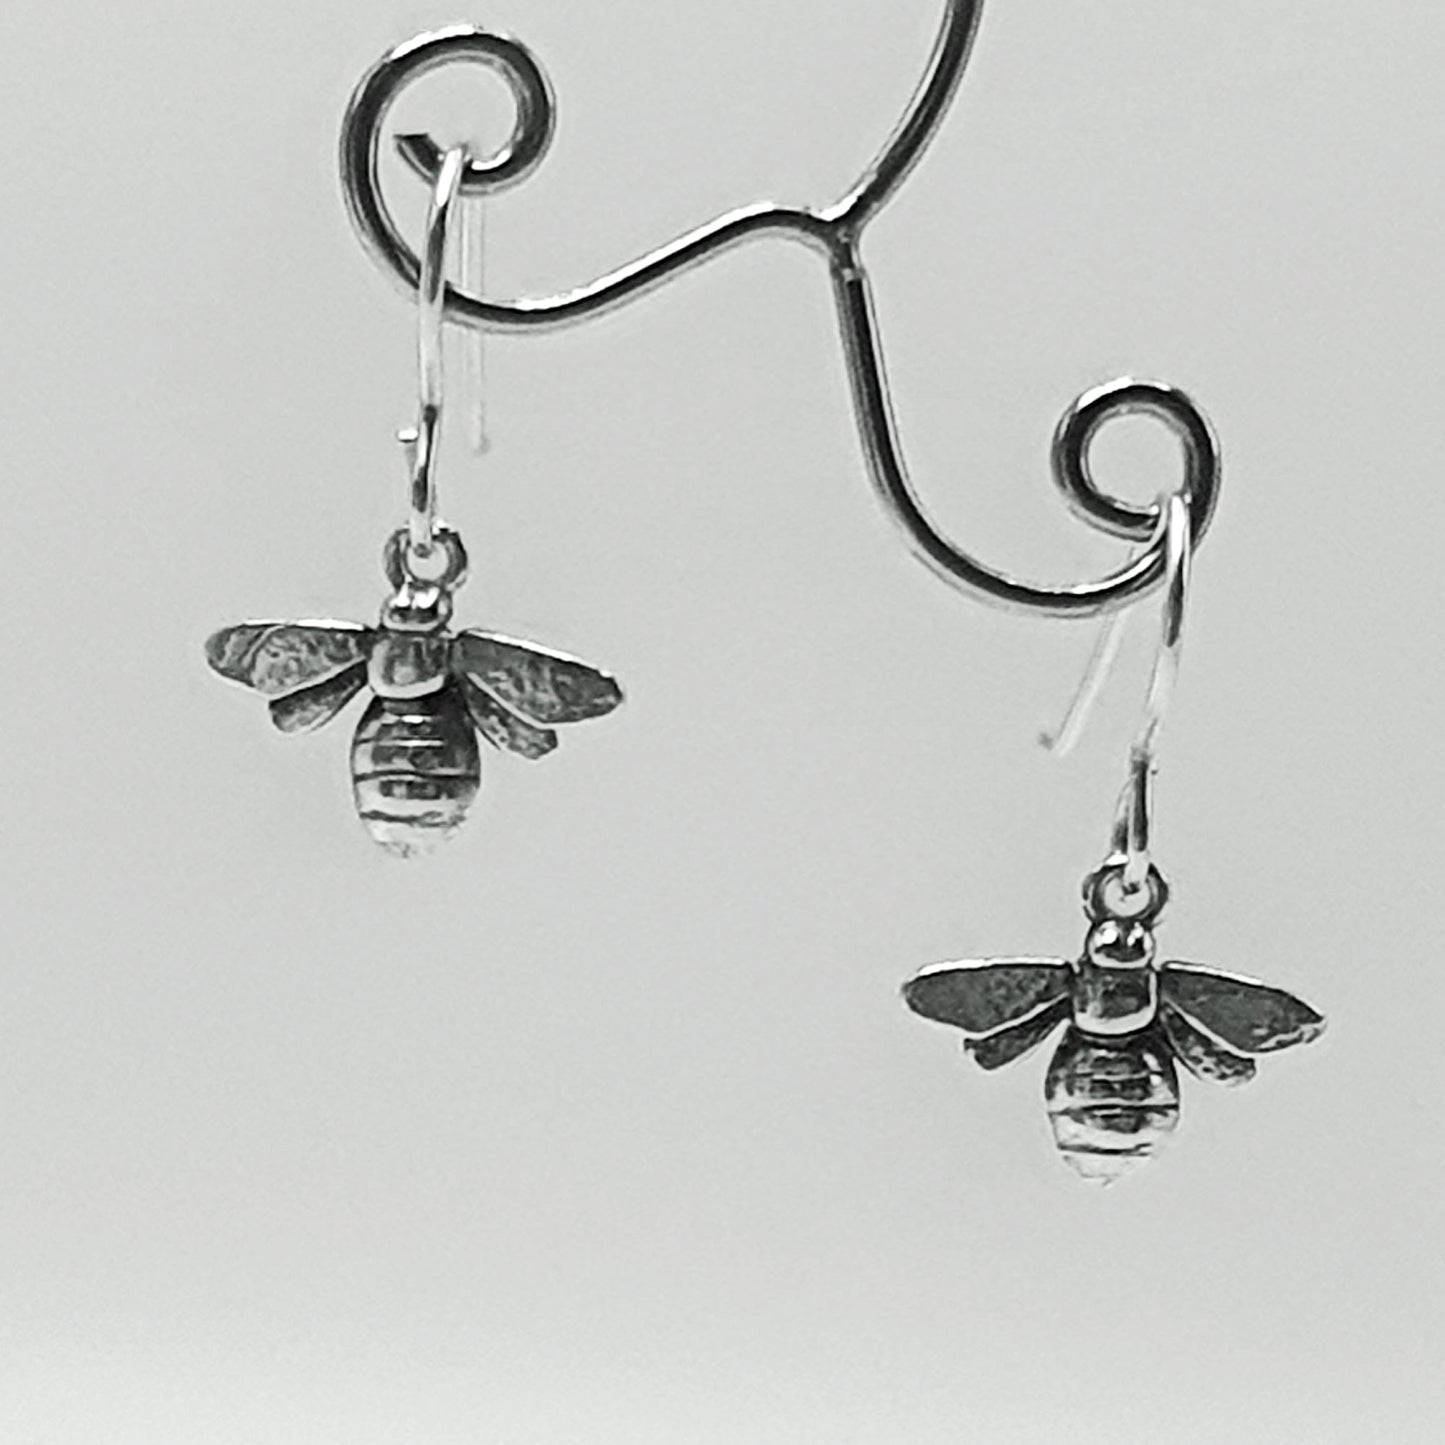 Sterling silver bees on a short ear wire